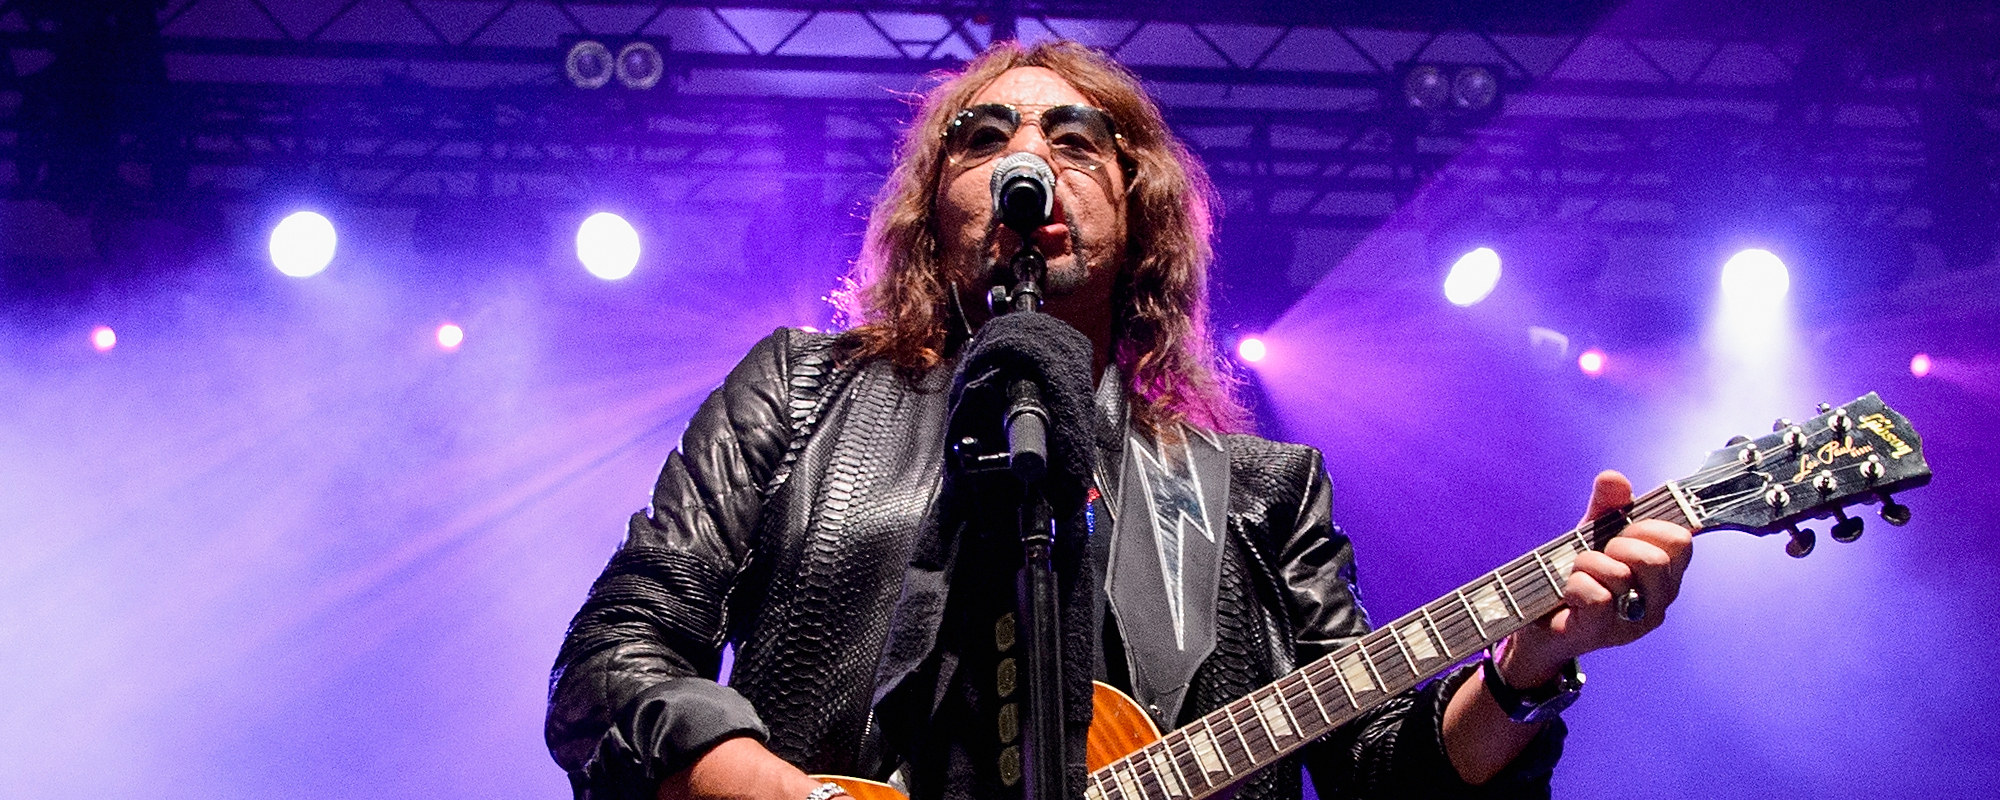 Ace Frehley Sets Record Straight on Who Performed Guitar Solos on ‘10,000 Volts’ Album